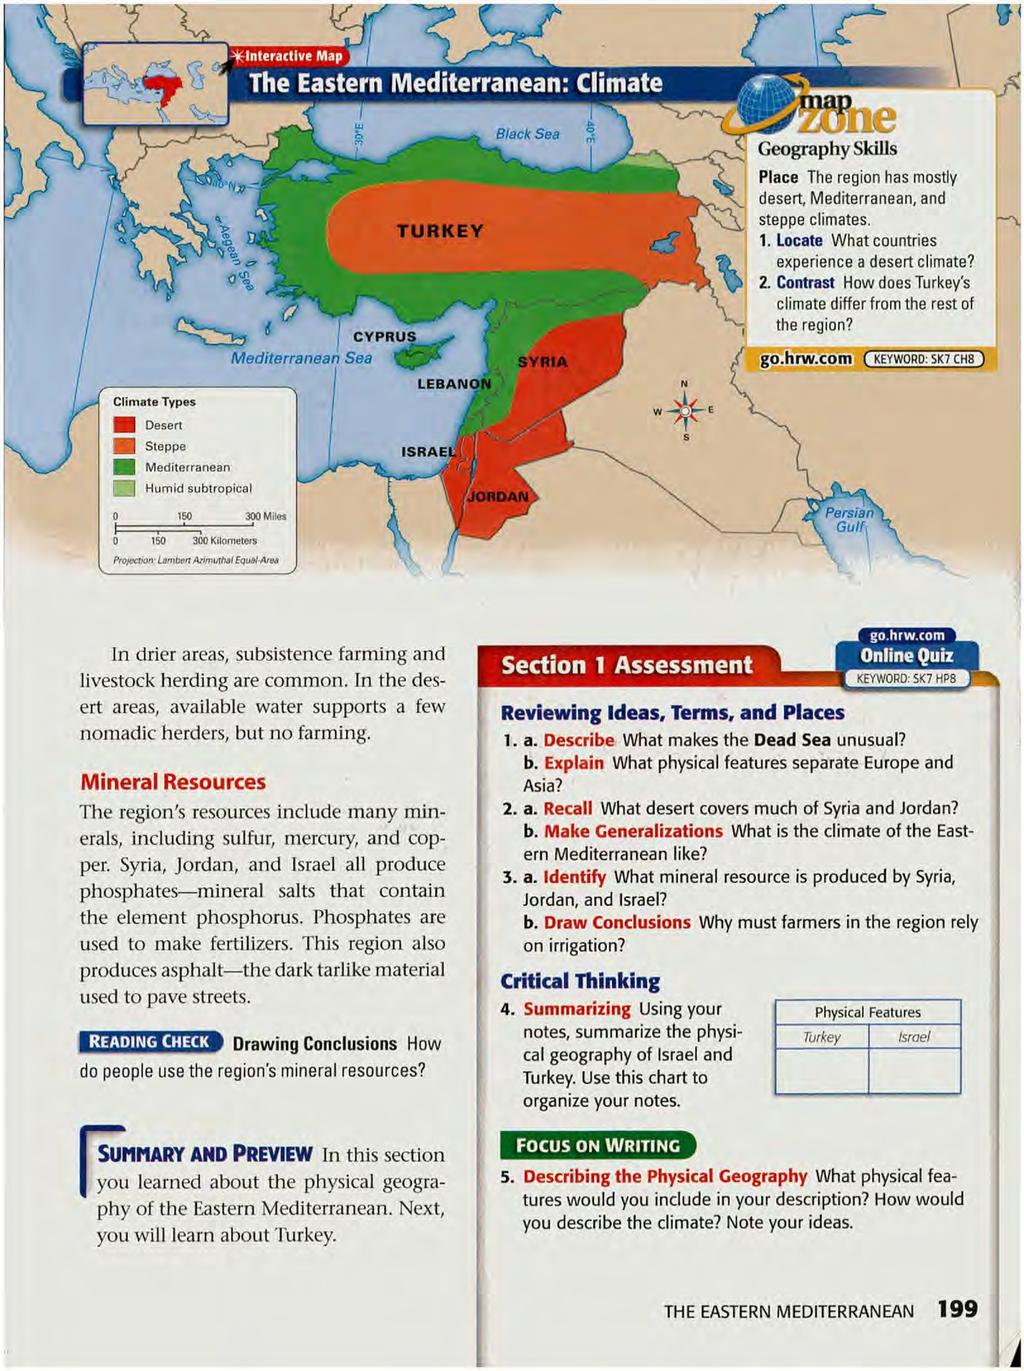 I ^In teractiv e Map The Eastern Mediterranean: Climate V ' ' ' N Climate Types Desert m Steppe aa Mediterranean Humid subtropical 0 150 300 Miles 1-------- 0 150 300 Kilometers Projection: Lambert